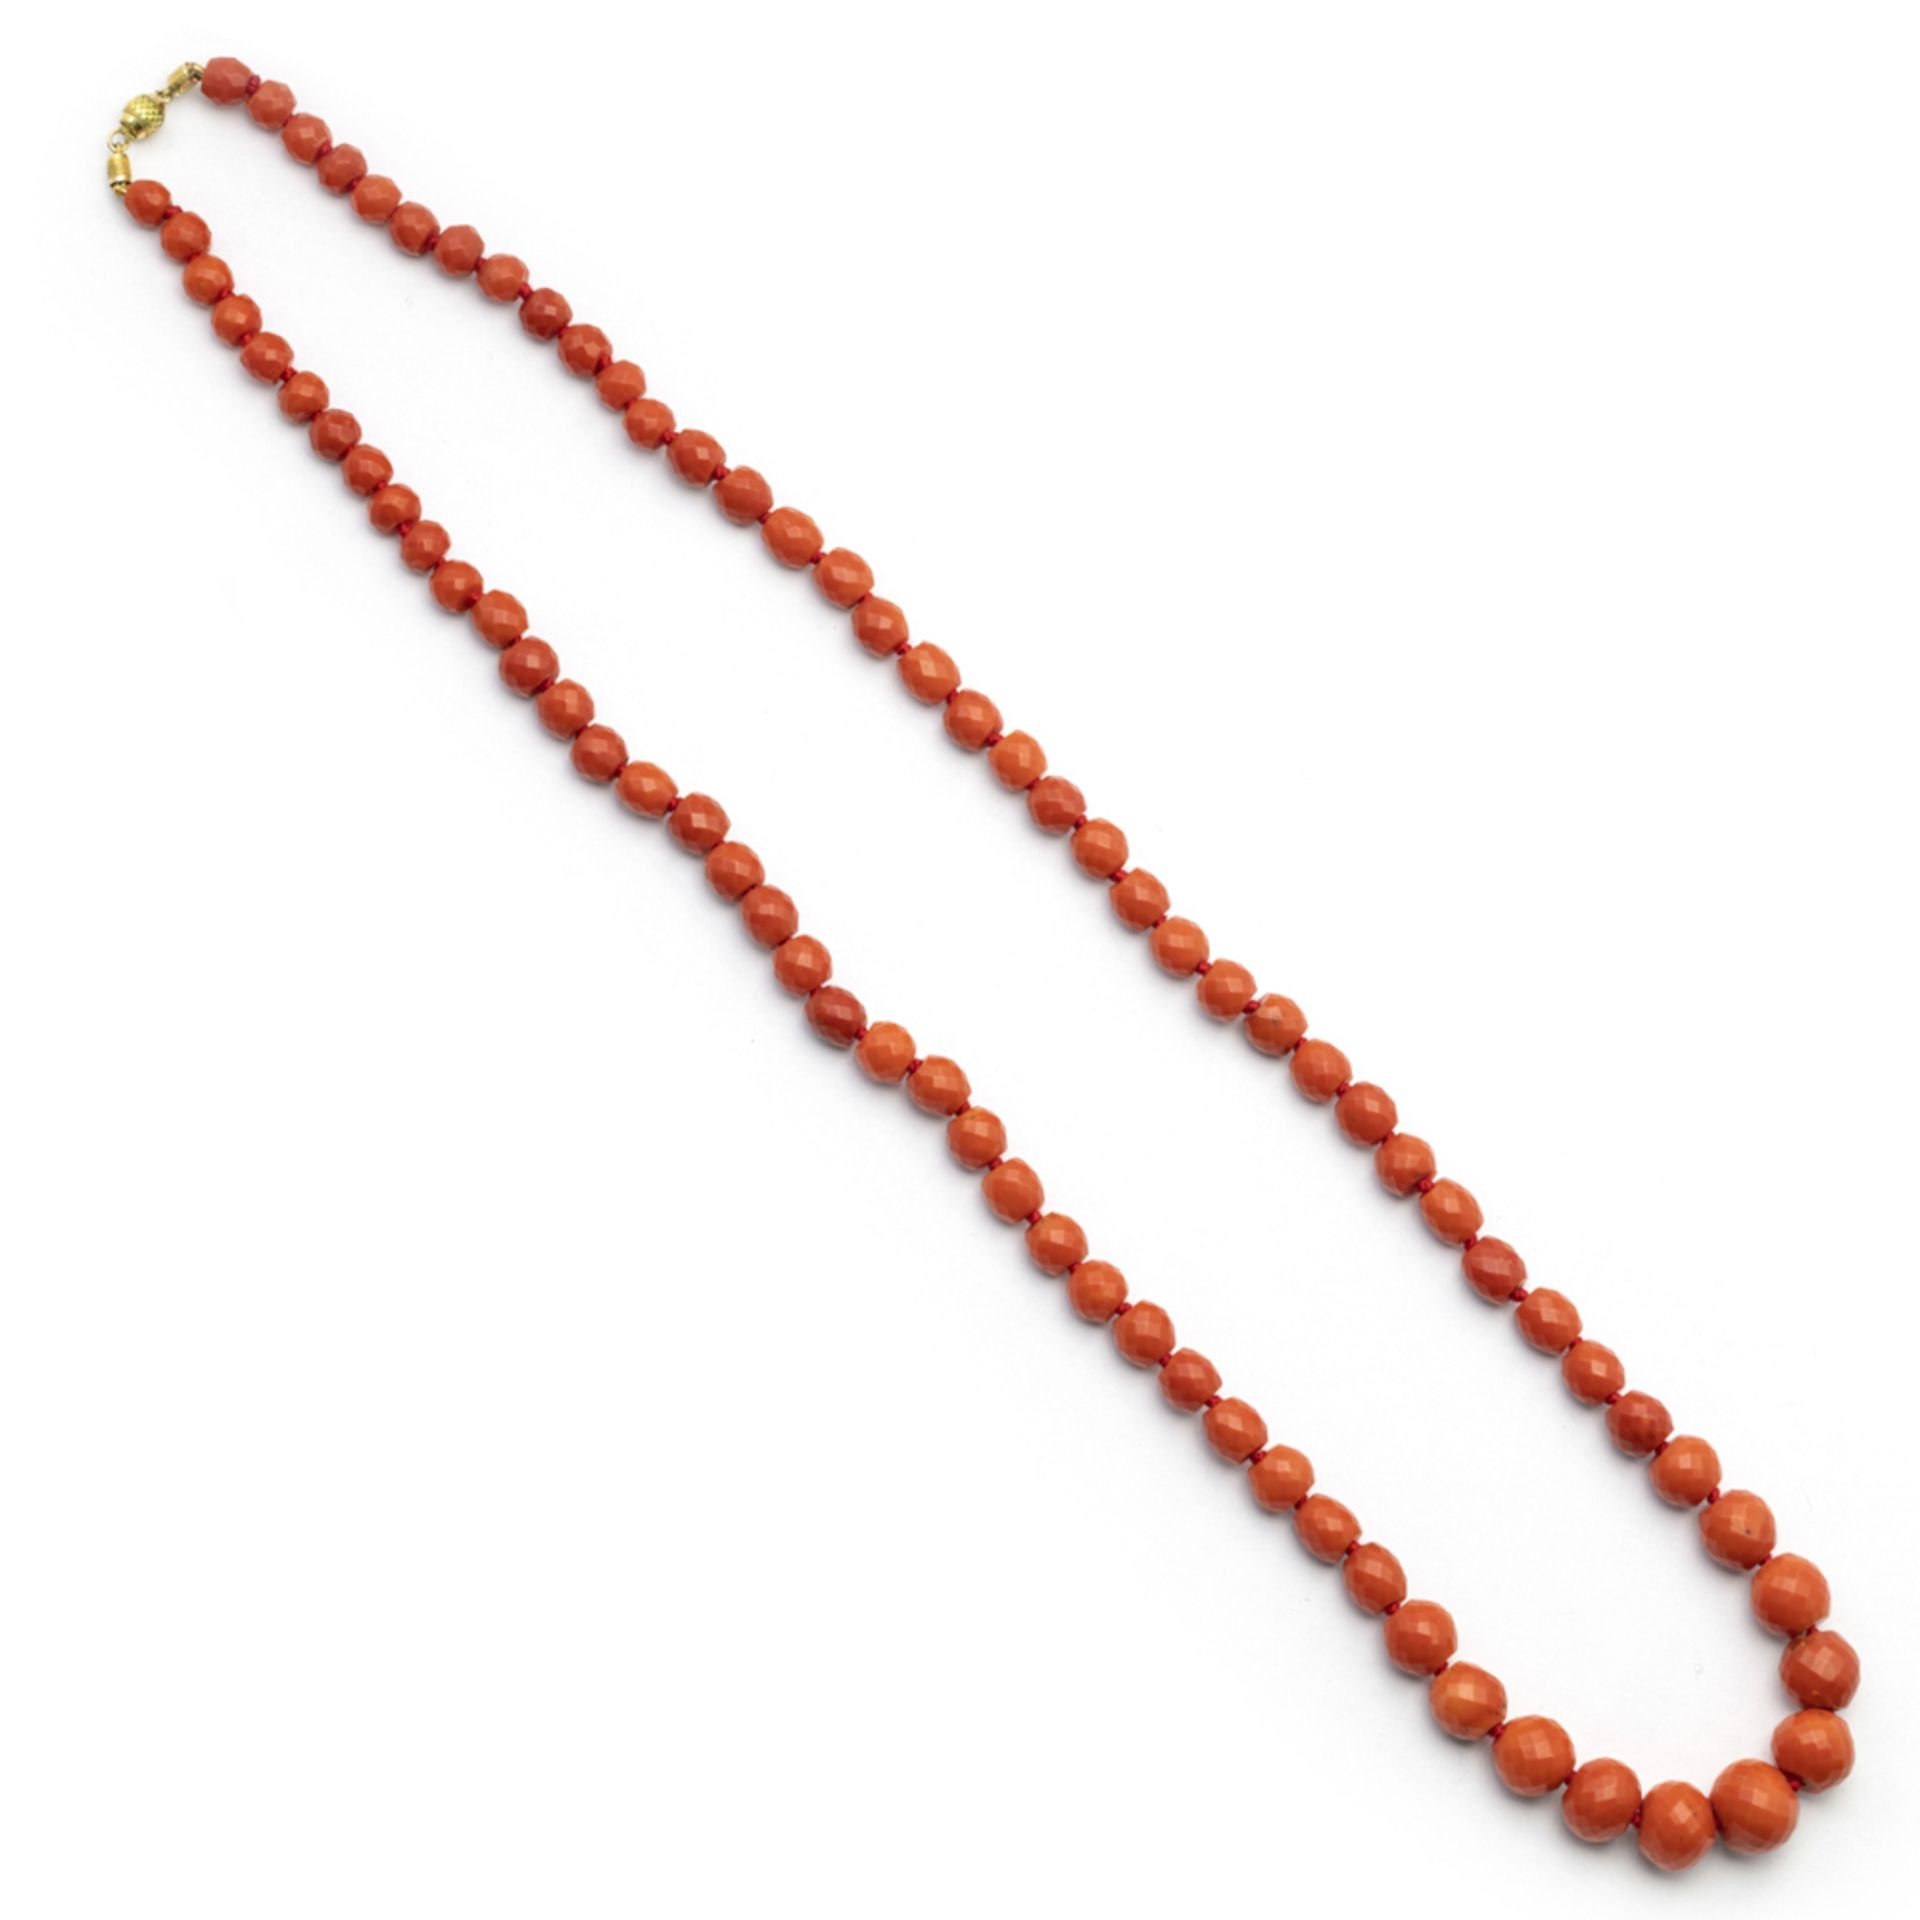 Single strand of faceted corals necklace